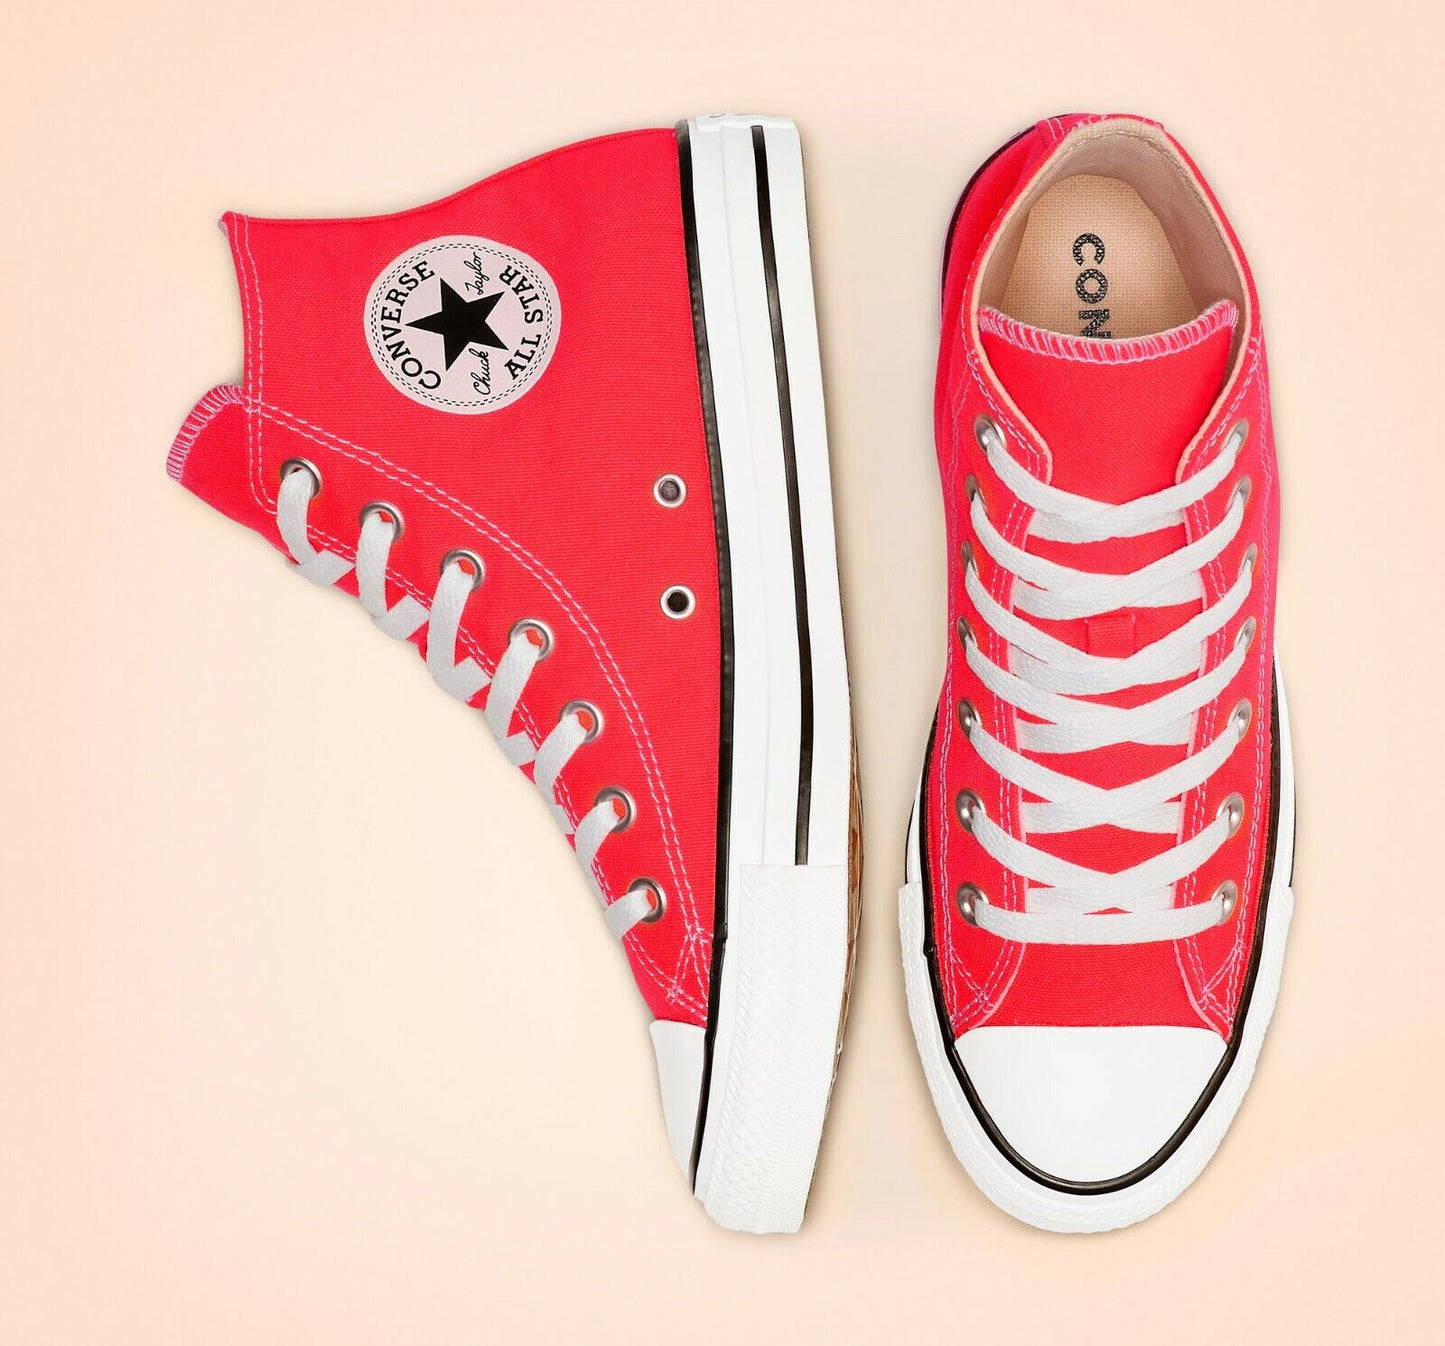 Converse Chuck Taylor All Star Hi Casual Shoes, 166264F Multi Sizes Brgt Crimson